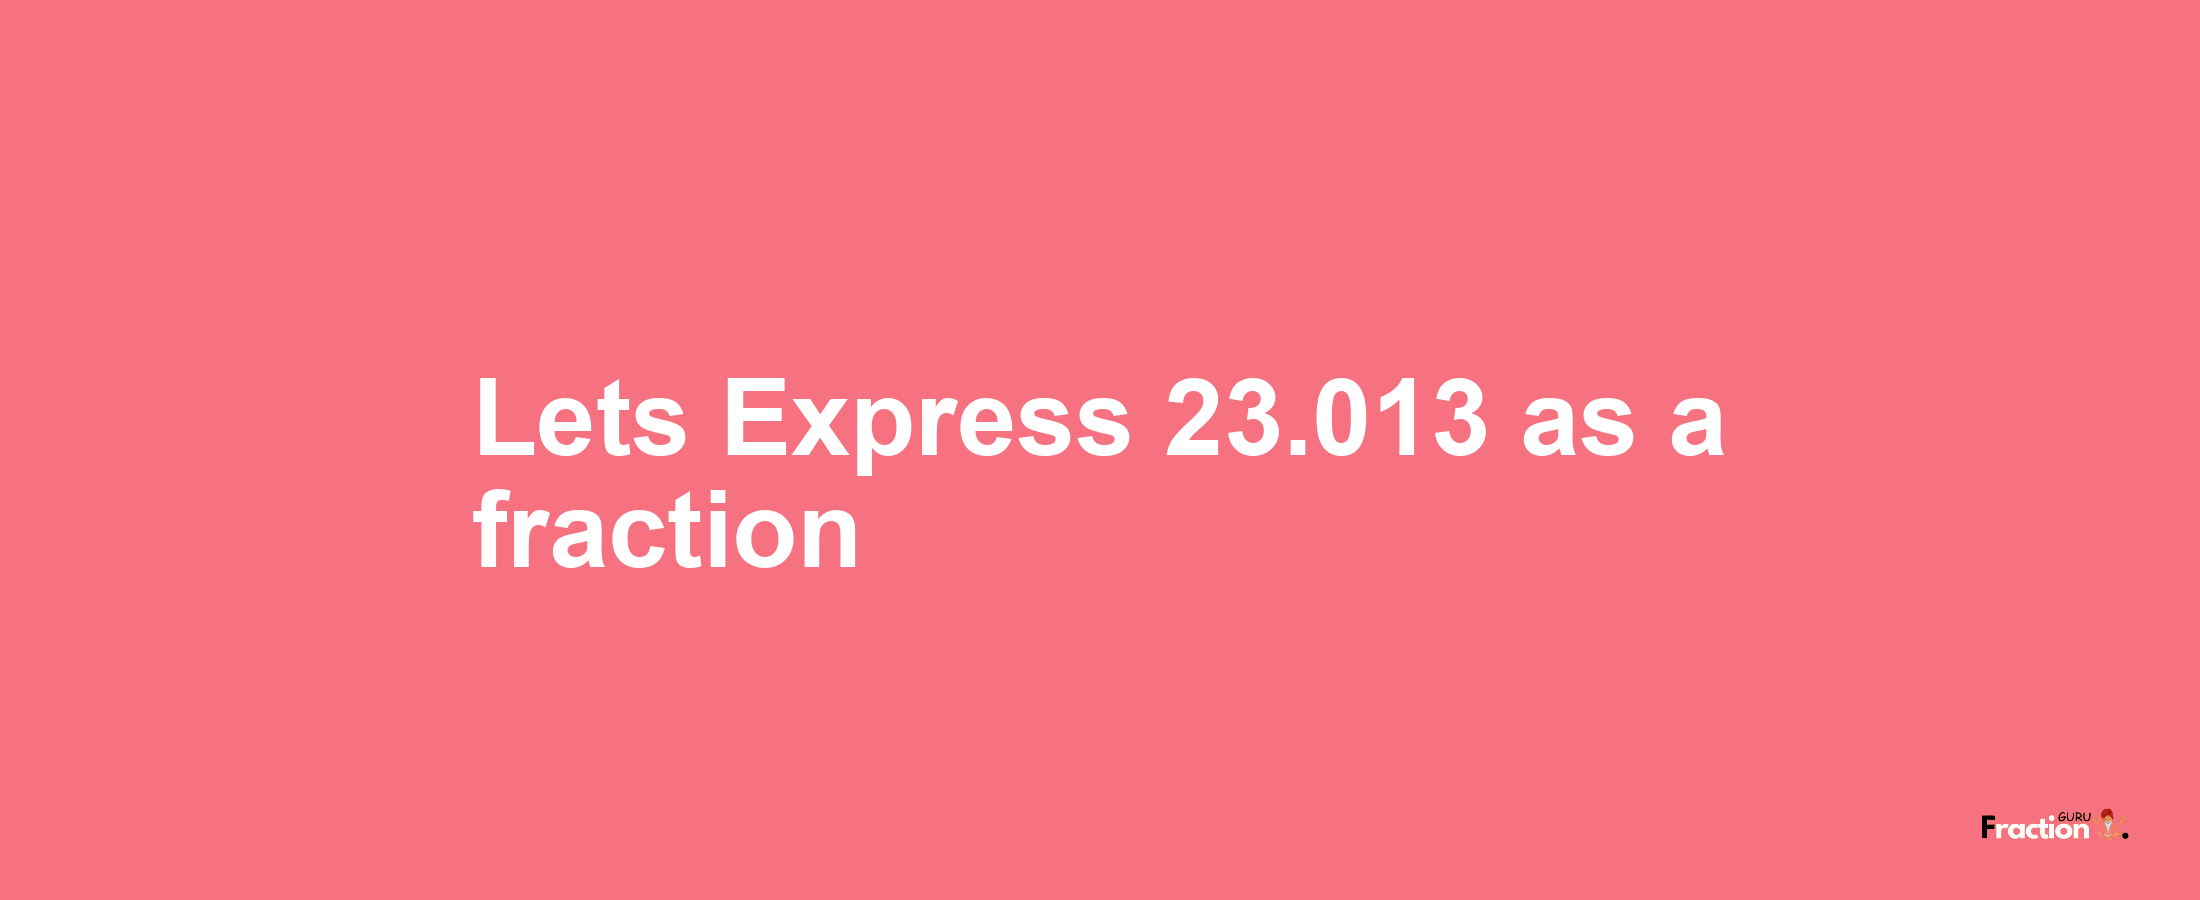 Lets Express 23.013 as afraction